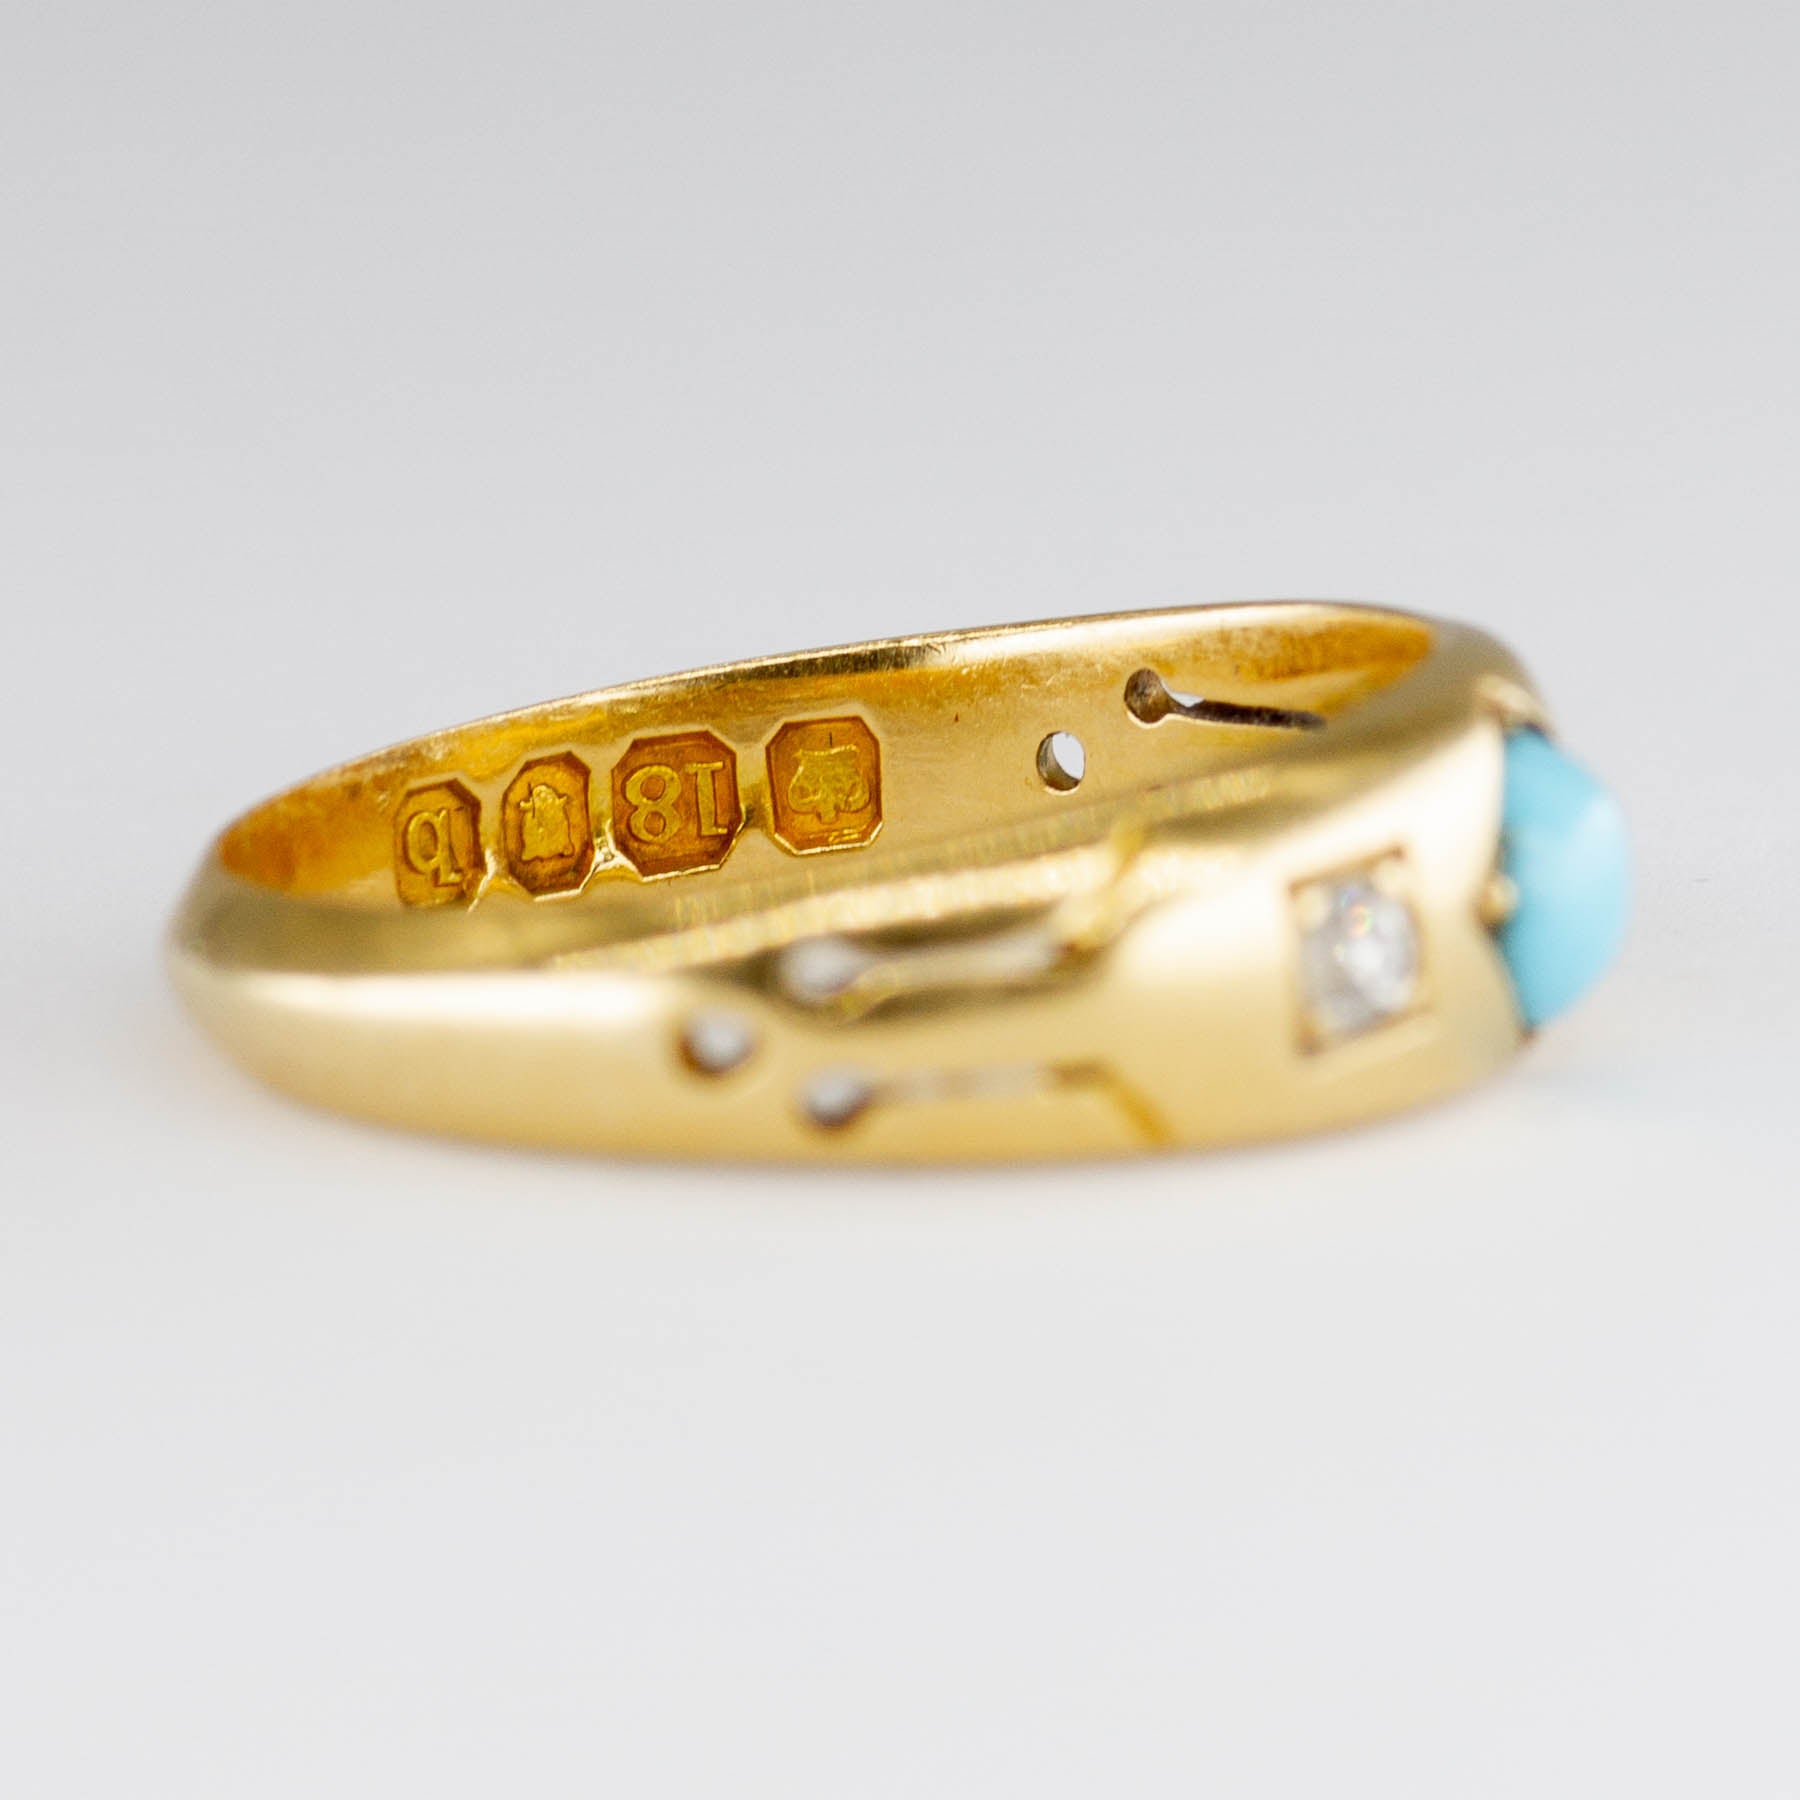 Victorian 1897 18k Gold Turquoise and Diamond Ring | 0.31ctw | SZ 6